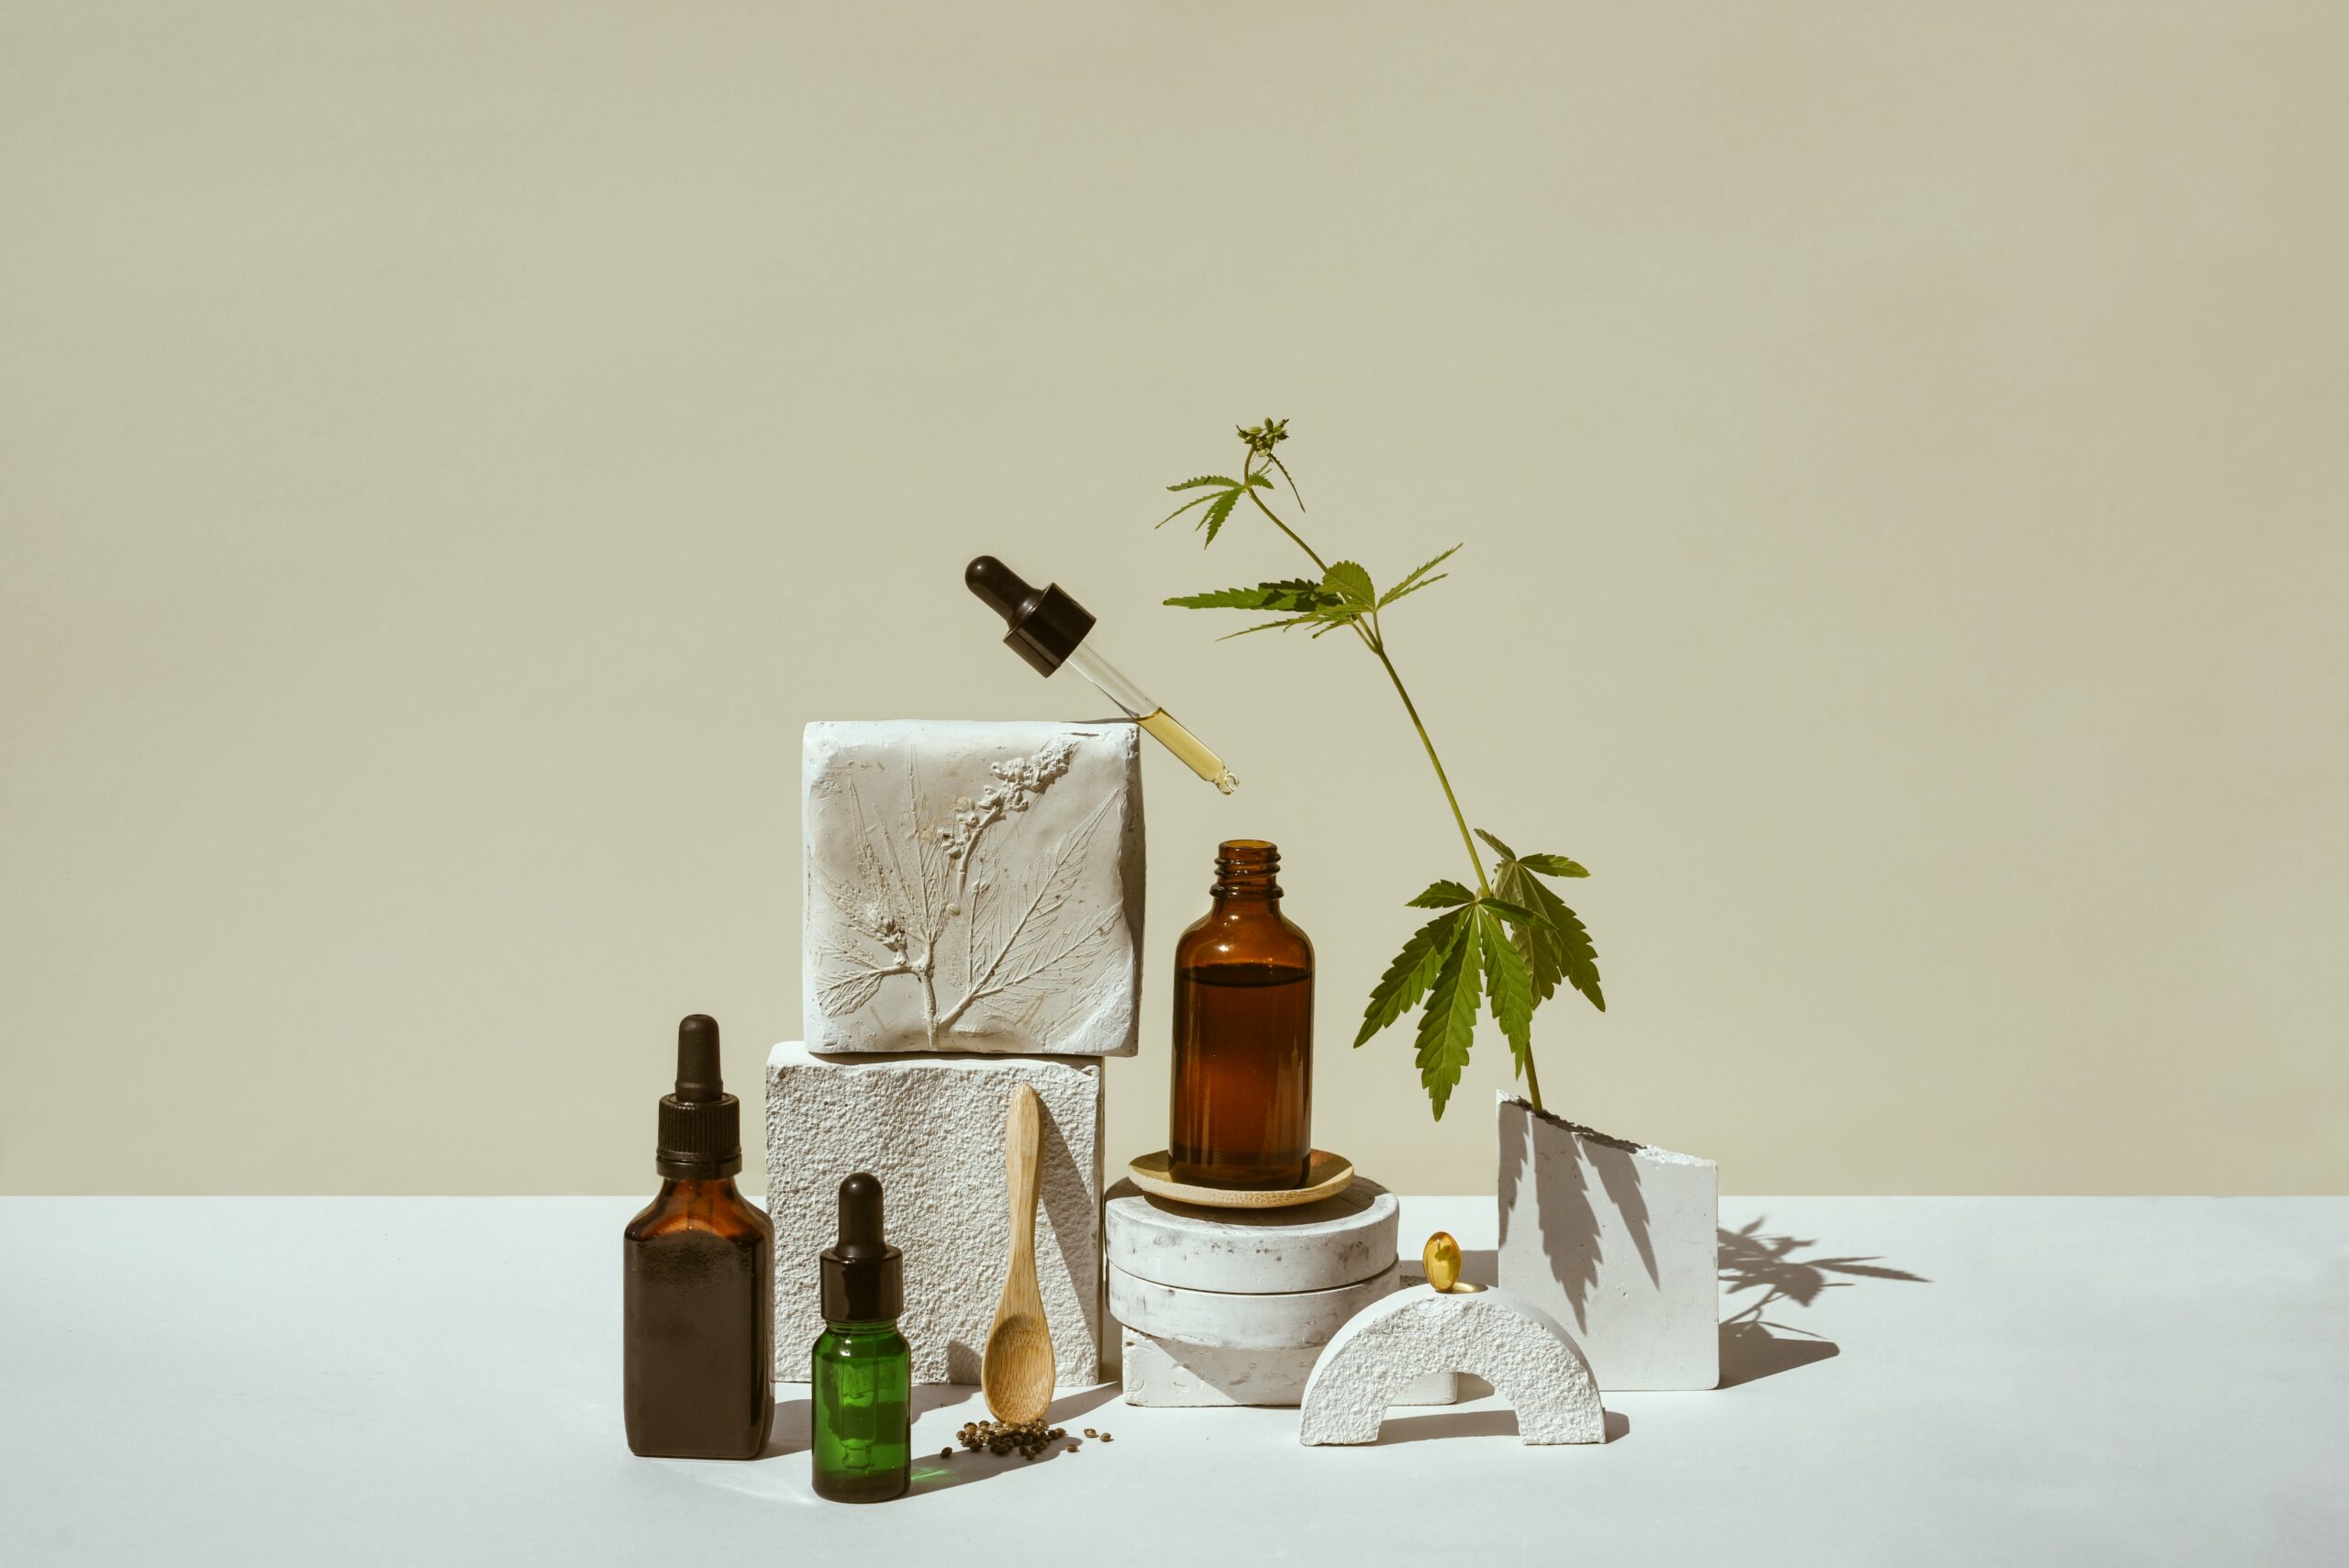 What Are The Uncommon Uses Of CBD Oil & CBD Products?